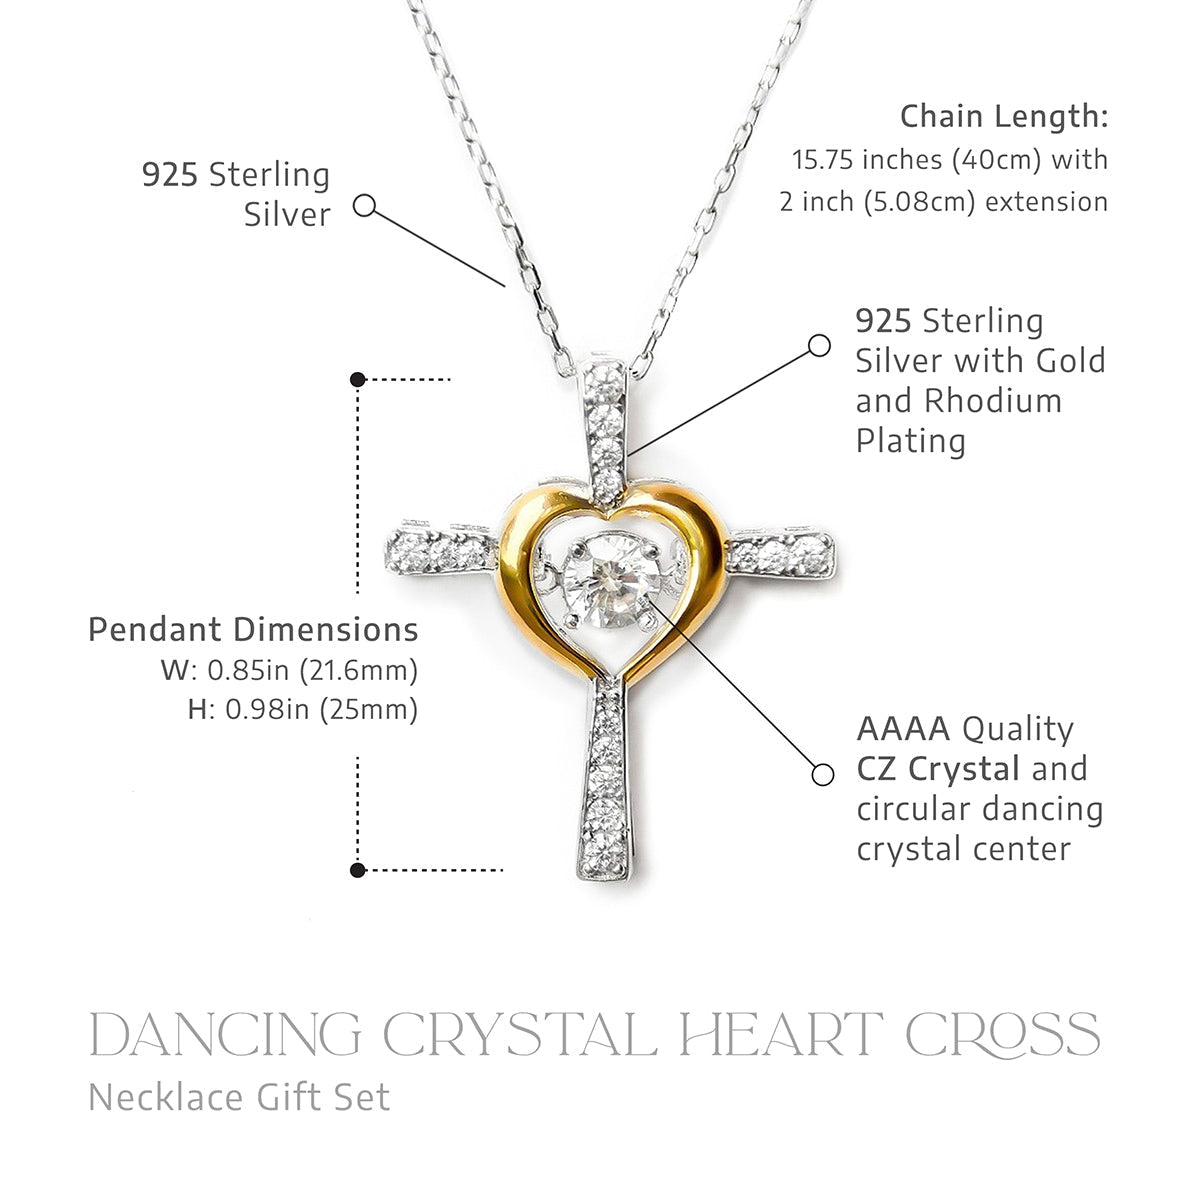 Too Beautiful for Earth - Dancing Crystal Heart Cross Necklace Gift Set